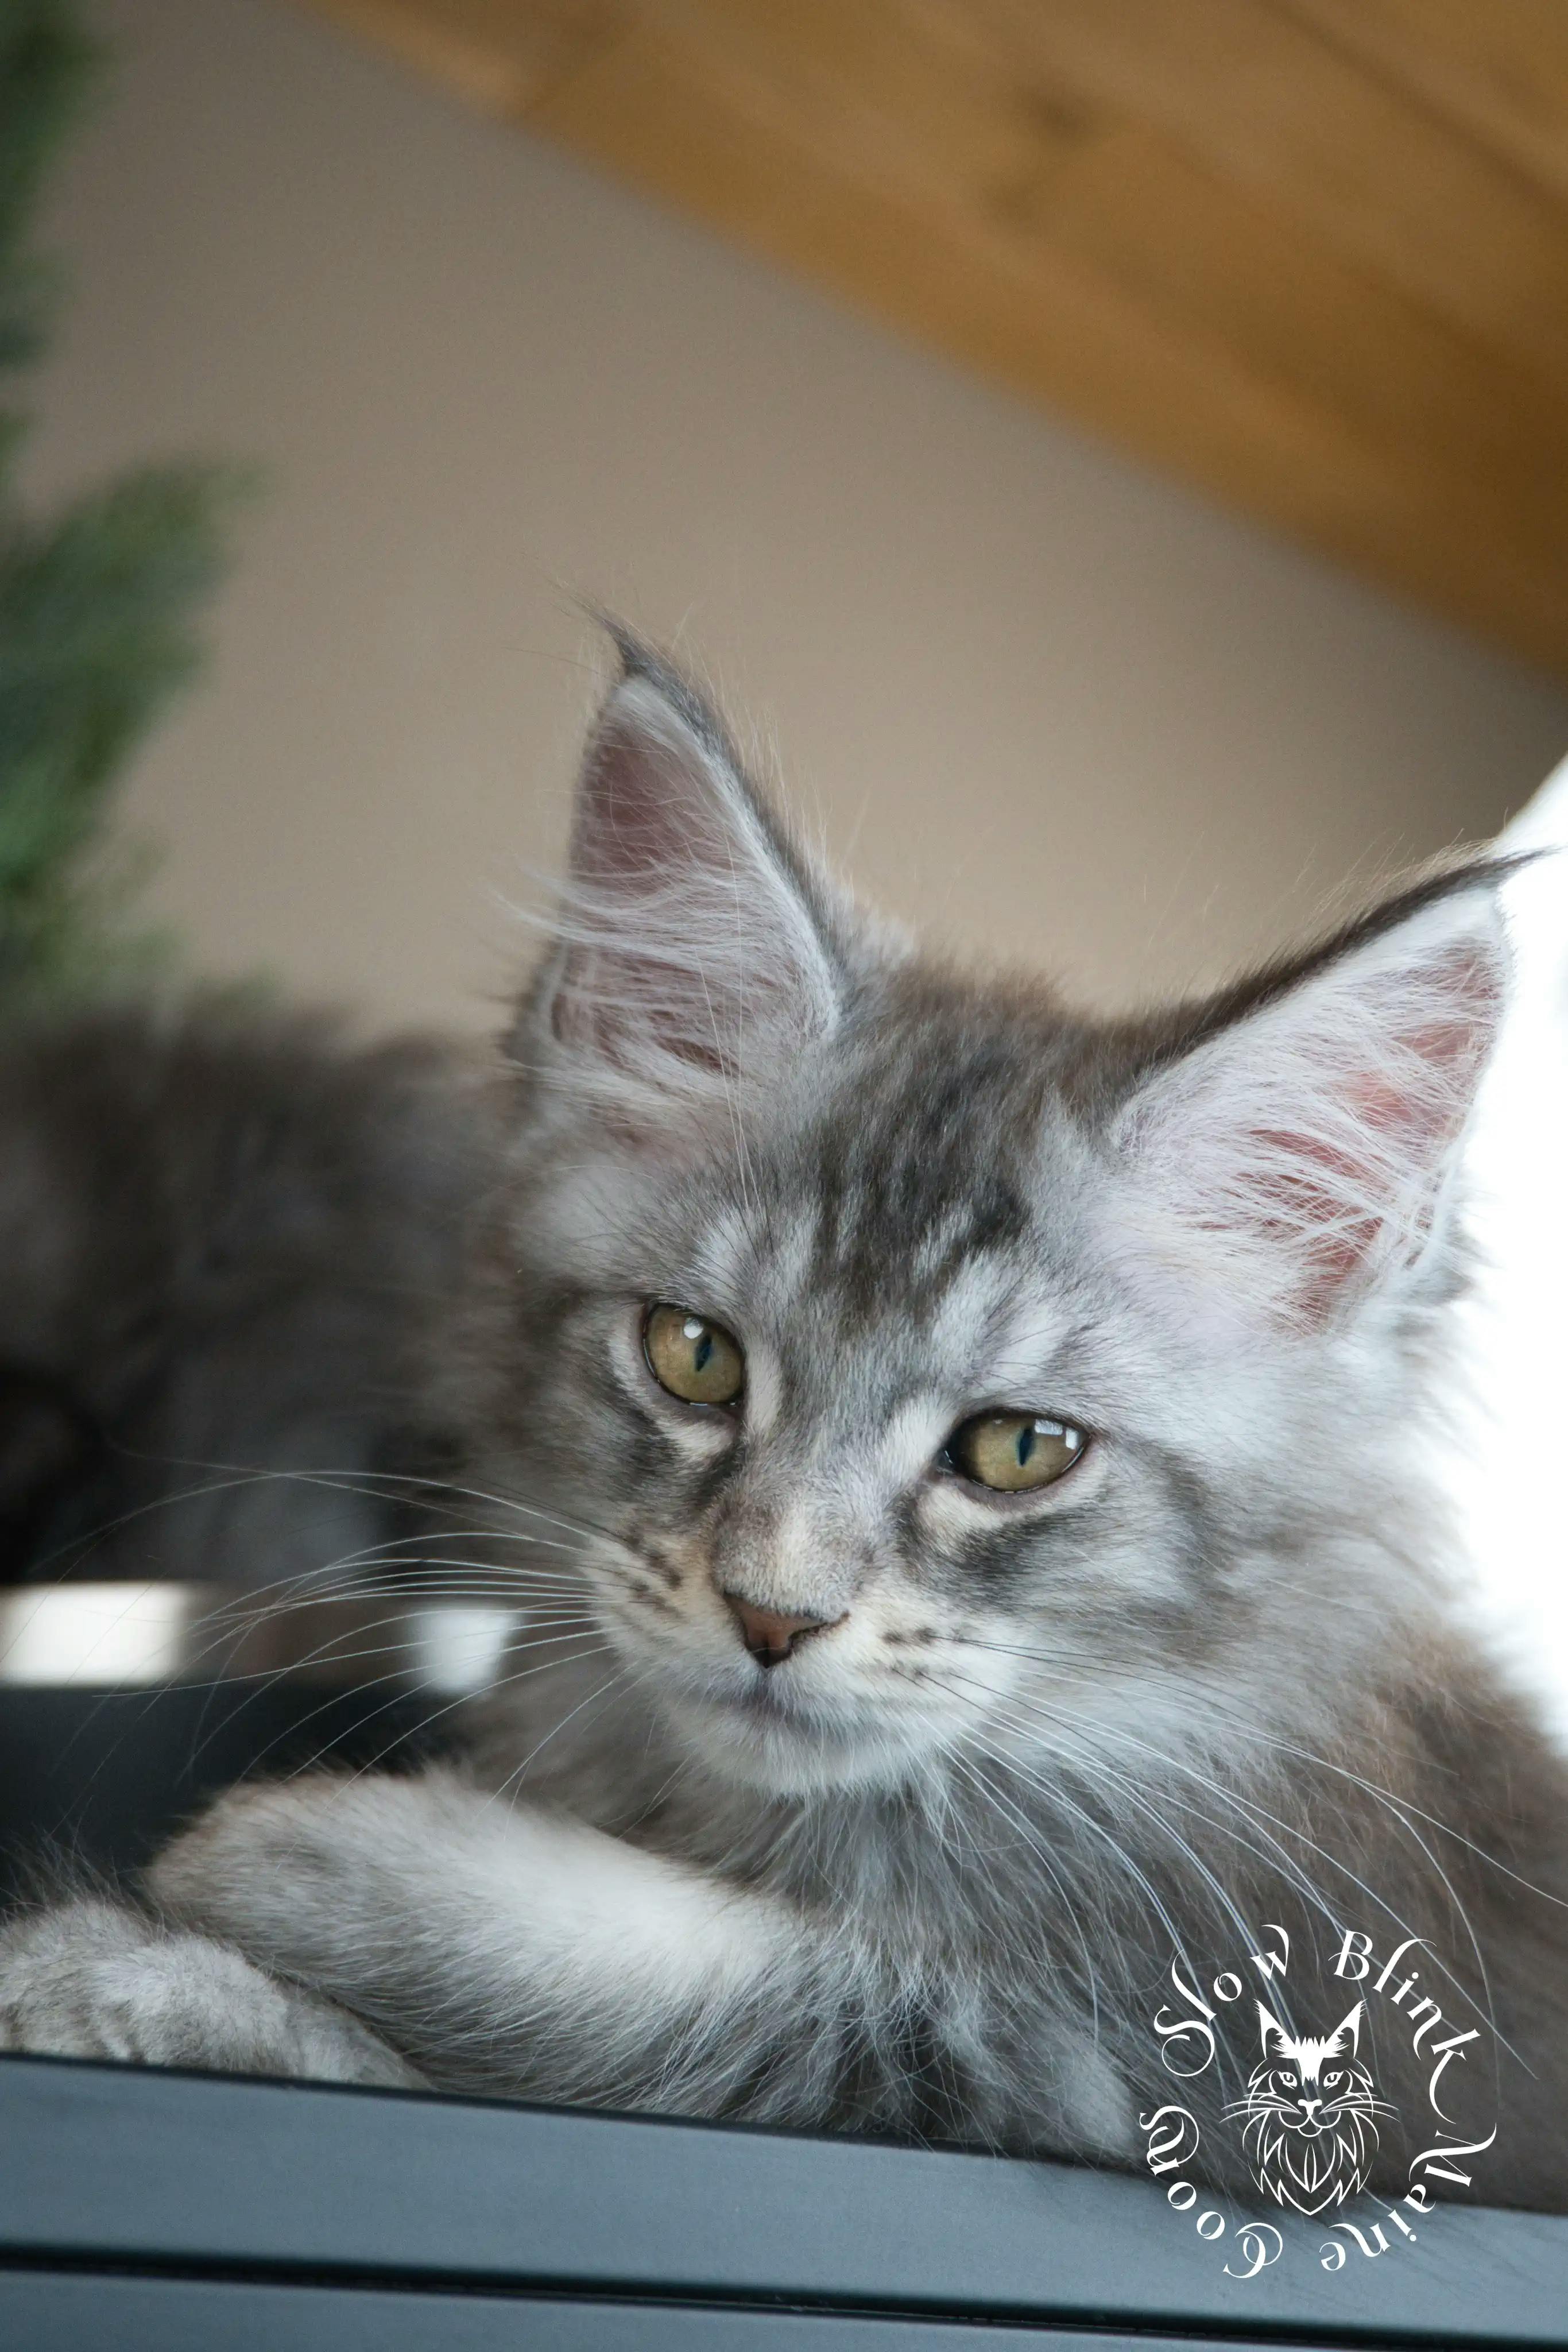 Blue Silver Tabby Maine Coon Kittens > blue silver tabby maine coon kitten | slowblinkmainecoons | 614